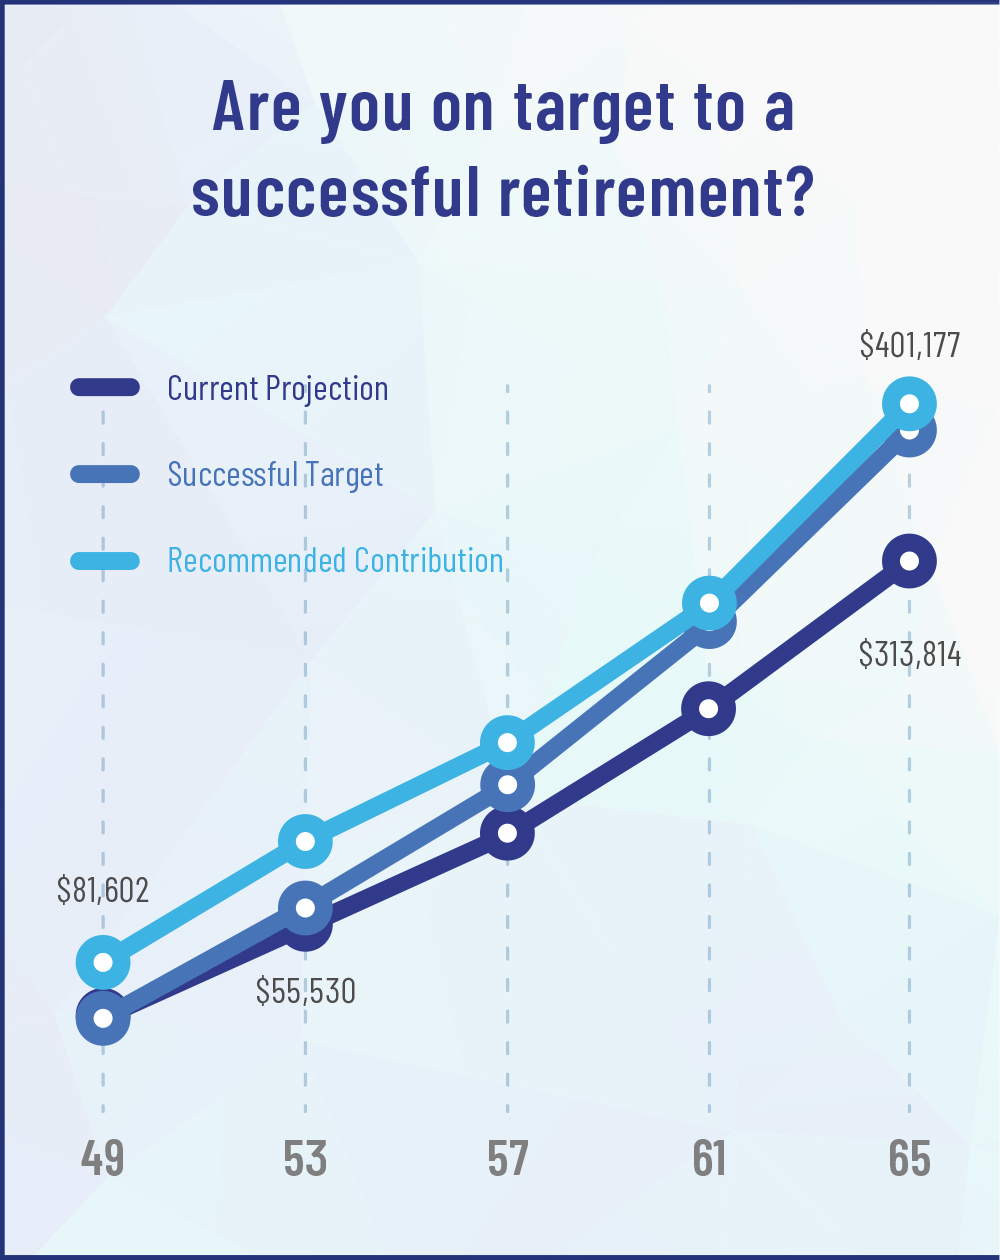 Chart: Are you on target to a successful retirement? Content of chart is a line graph showing the difference between an example "current projection," "recommended contribution," and "successful target."